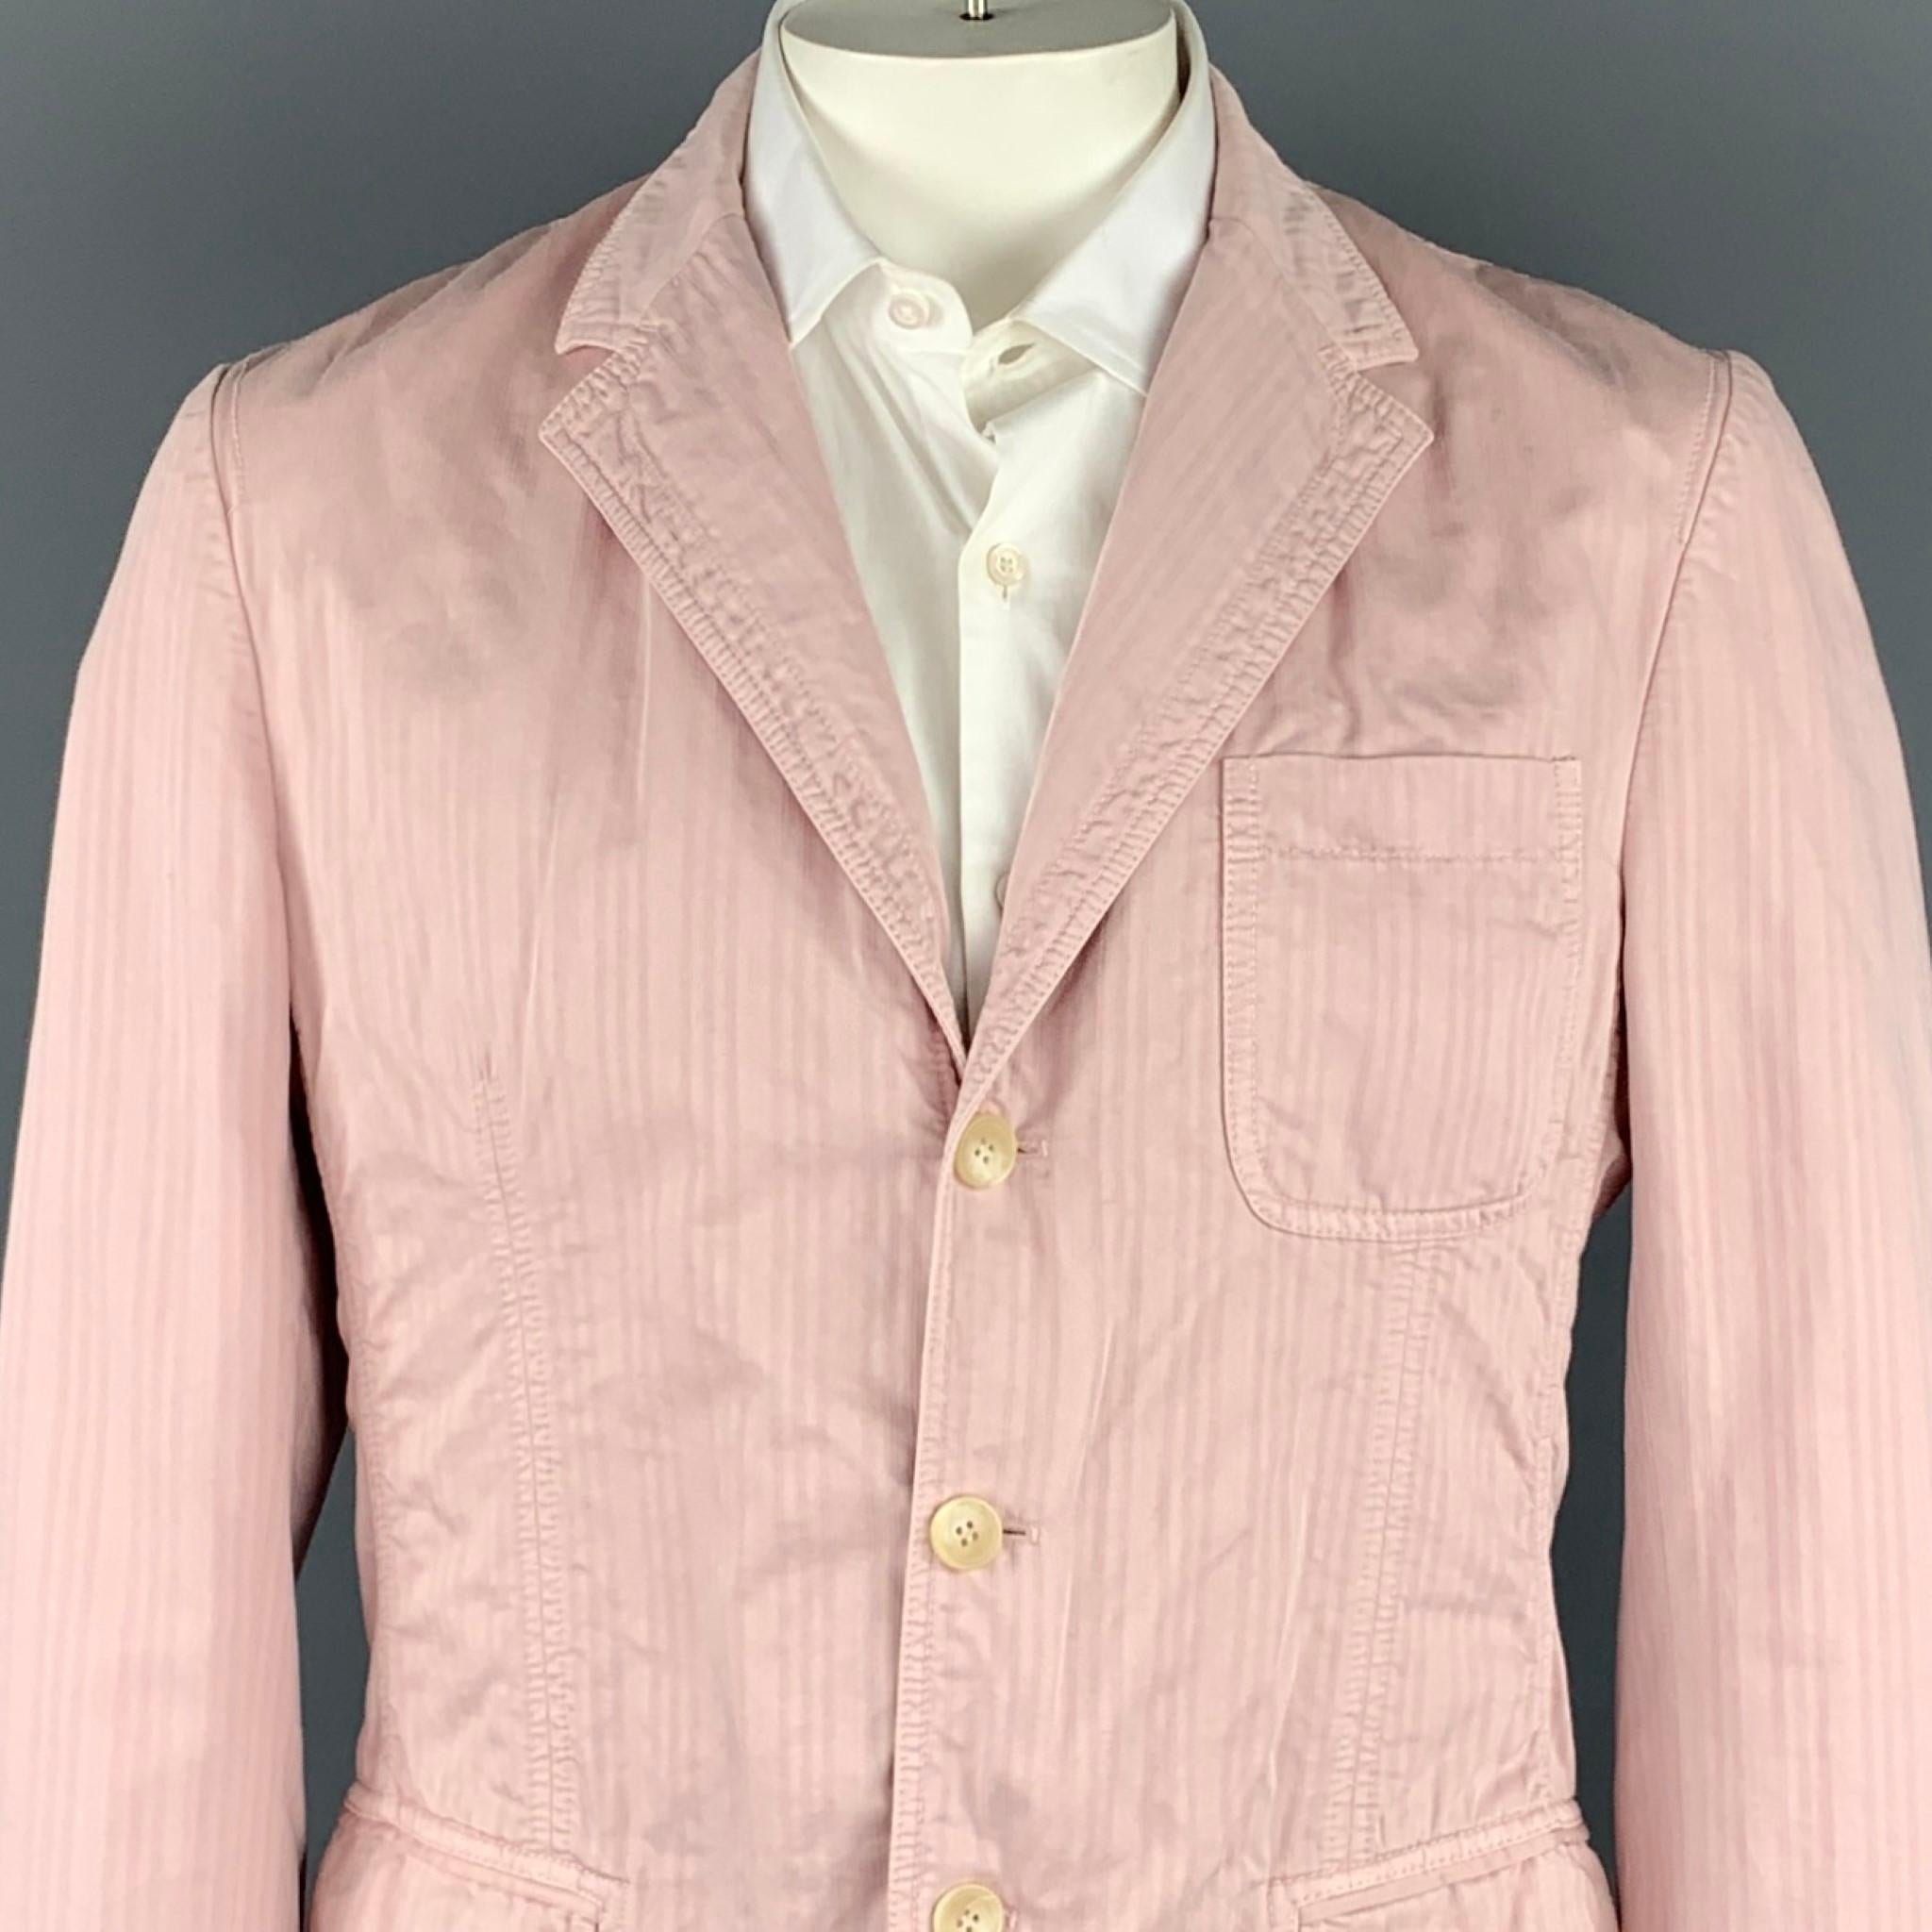 D&G by DOLCE & GABBANA sport coat comes in a rose stripe cotton featuring a notch lapel, flap pockets, and a thress button closure. Made in Romania.

Very Good Pre-Owned Condition.
Marked: 38/52

Measurements:

Shoulder: 18 in.
Chest: 40 in.
Sleeve: